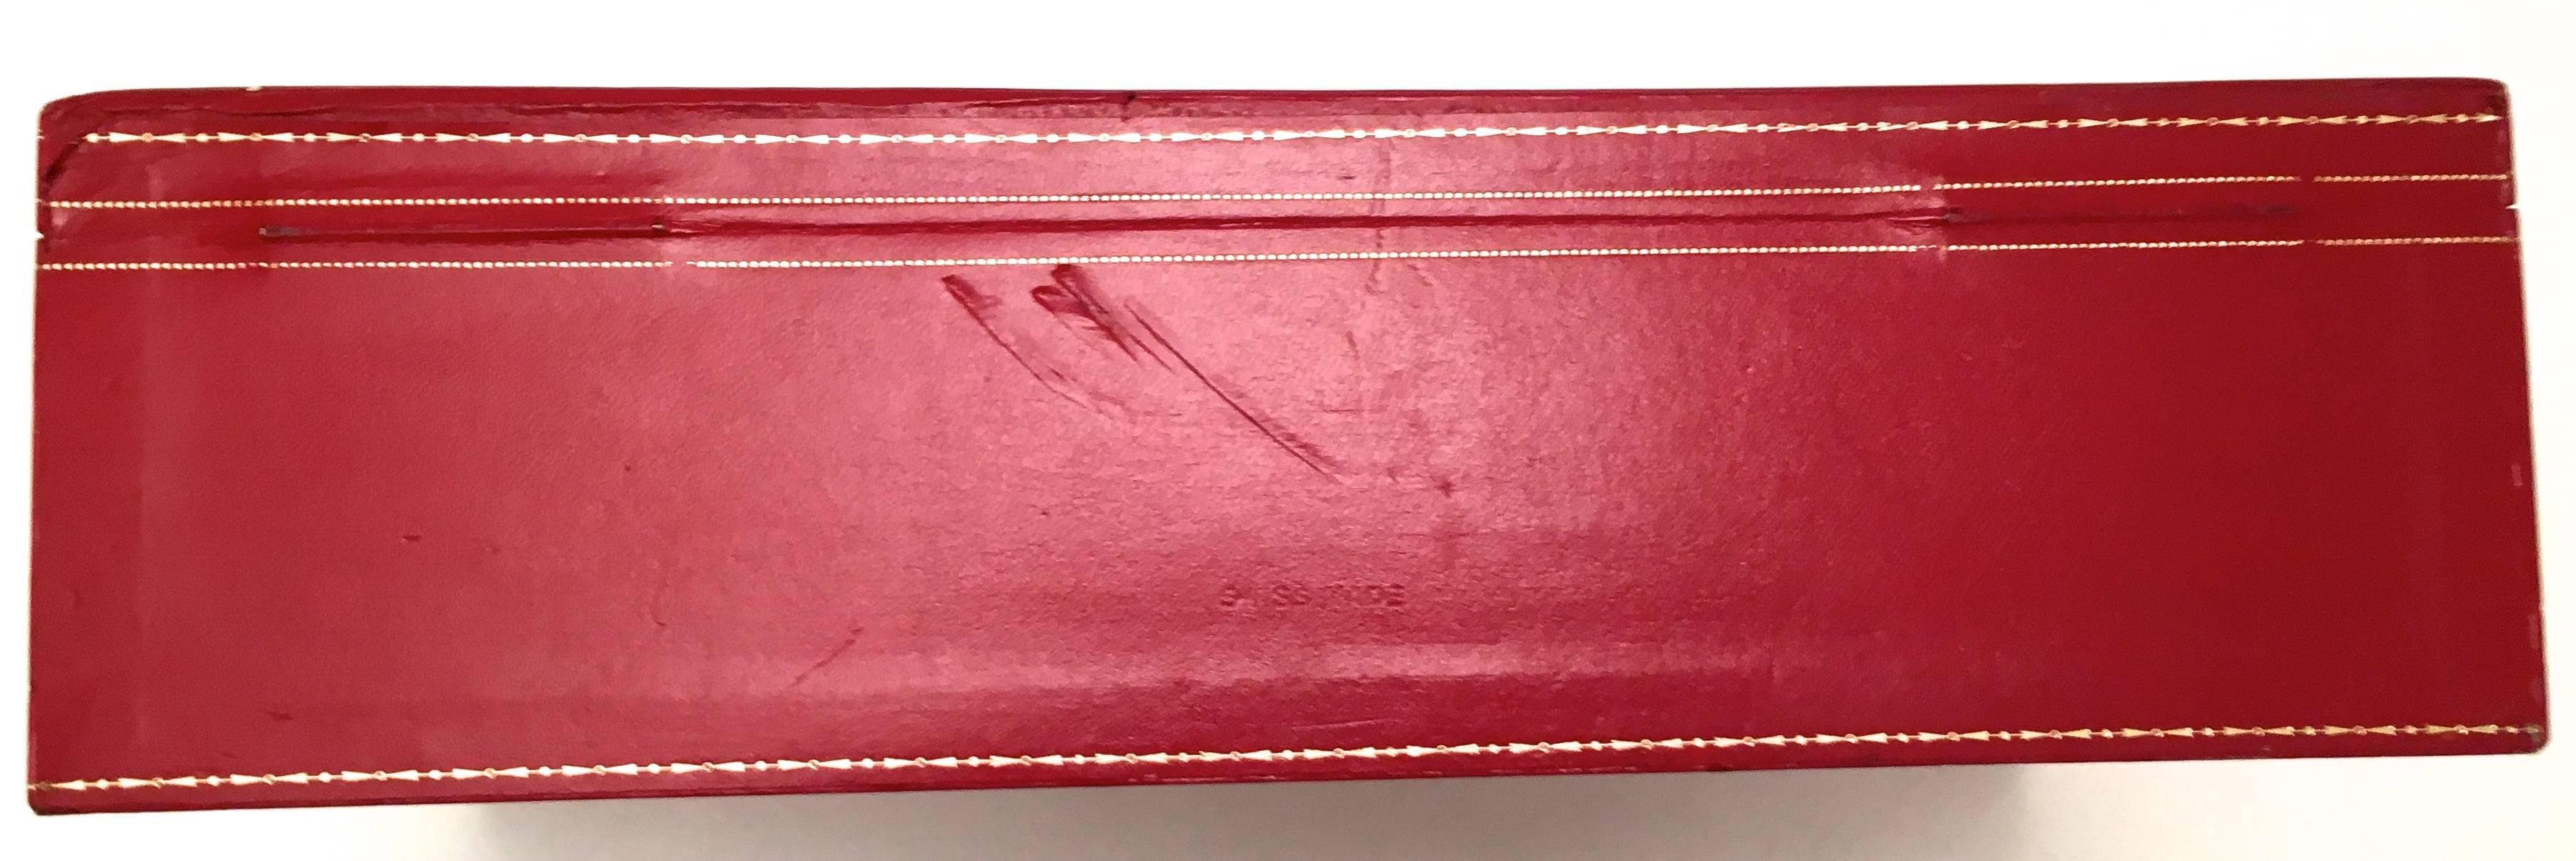 Women's or Men's Cartier Jewelry and Watch Box - Extra Large Size For Sale